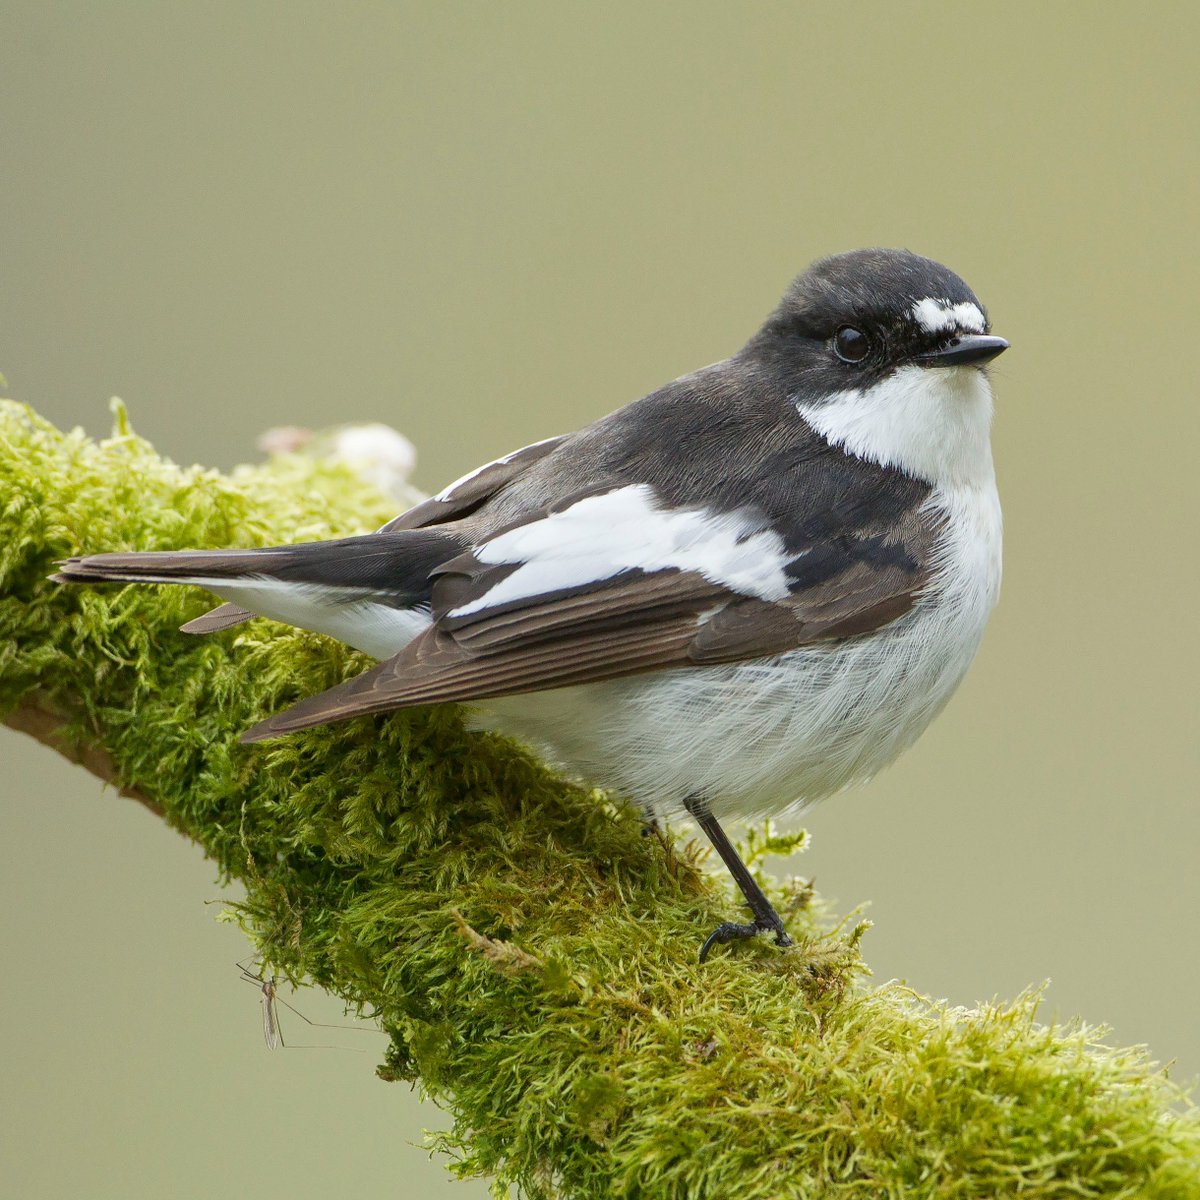 🎉 Today is #WorldMigratoryBirdDay! 🌍 #PiedFlycatchers are one of our summer visitors, migrating to our shores from West Africa. 🌳 They are #TemperateRainforest specialists, thriving in mature oak forests in western parts of the UK. 👉Learn more: bit.ly/3yfq3gv